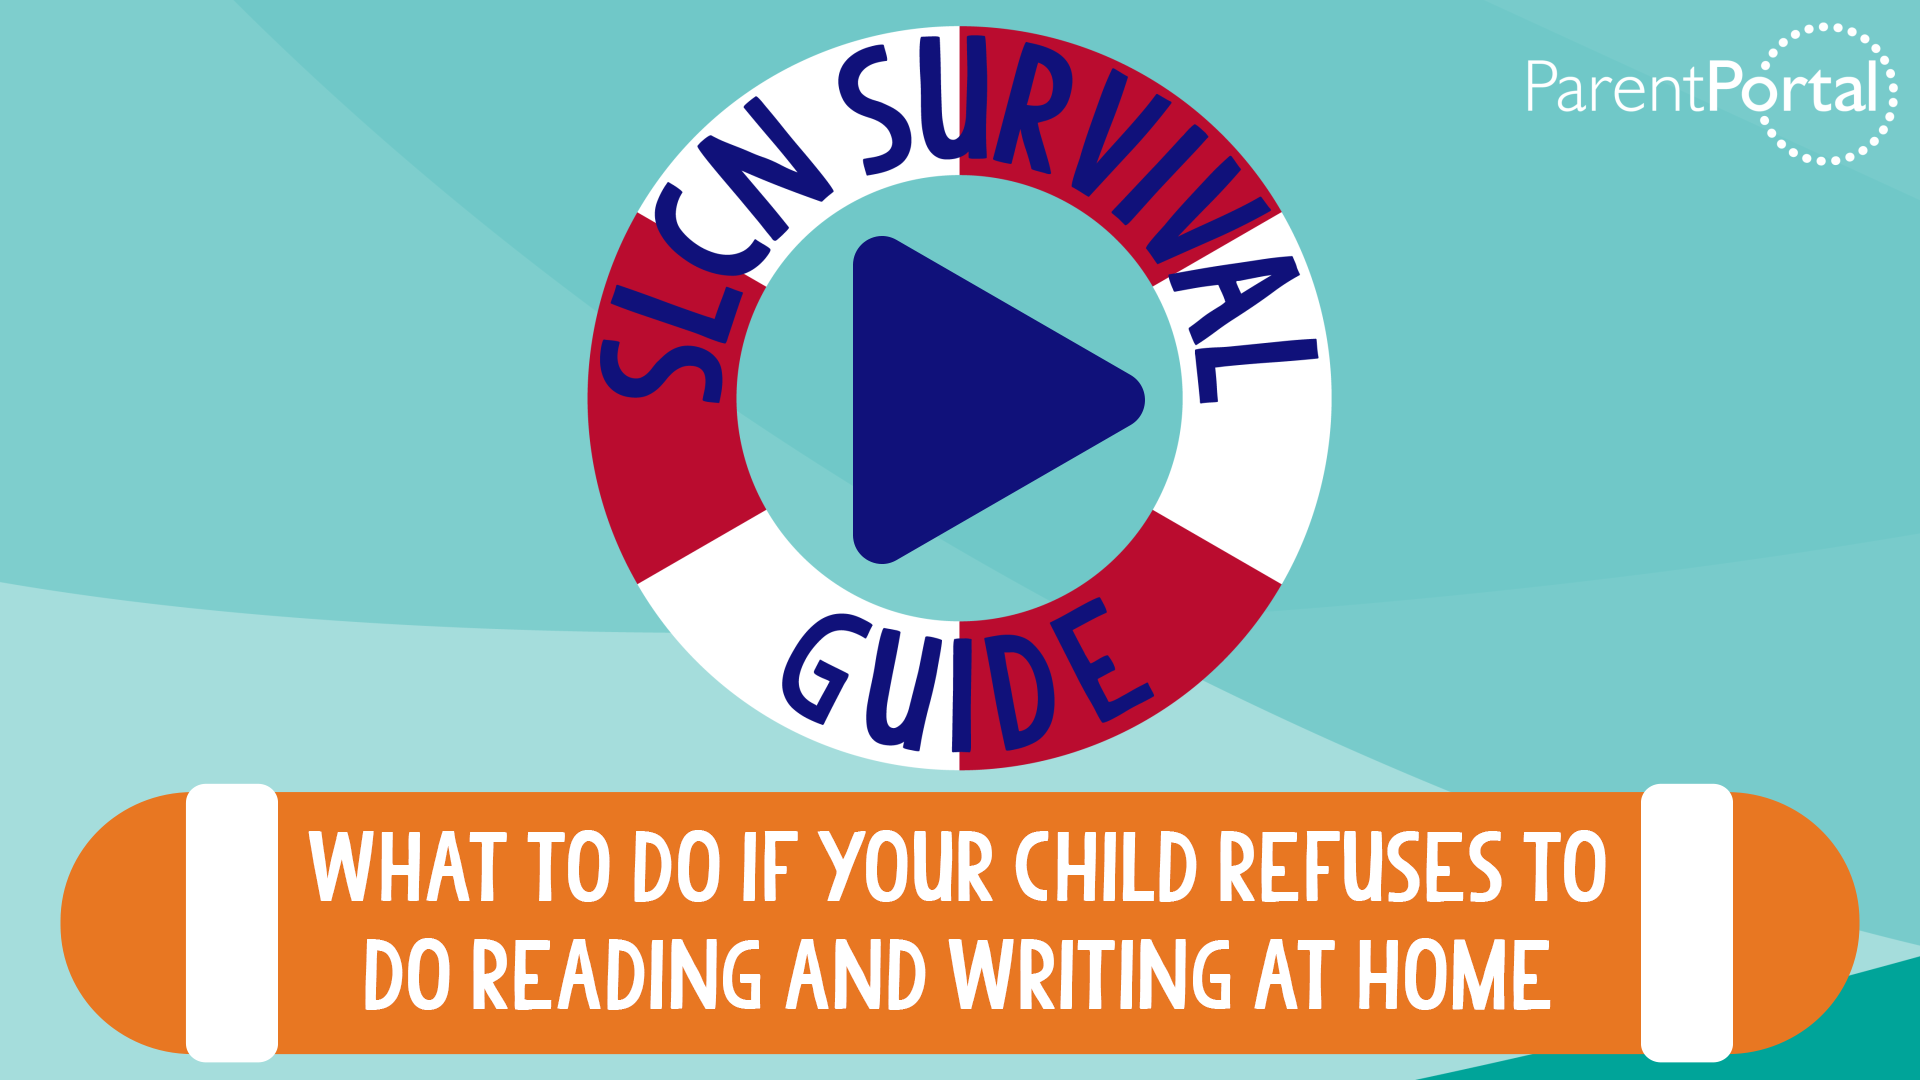 SLCN Survival Guide 3 - What to do if your child refuses to do reading and writing at home Video